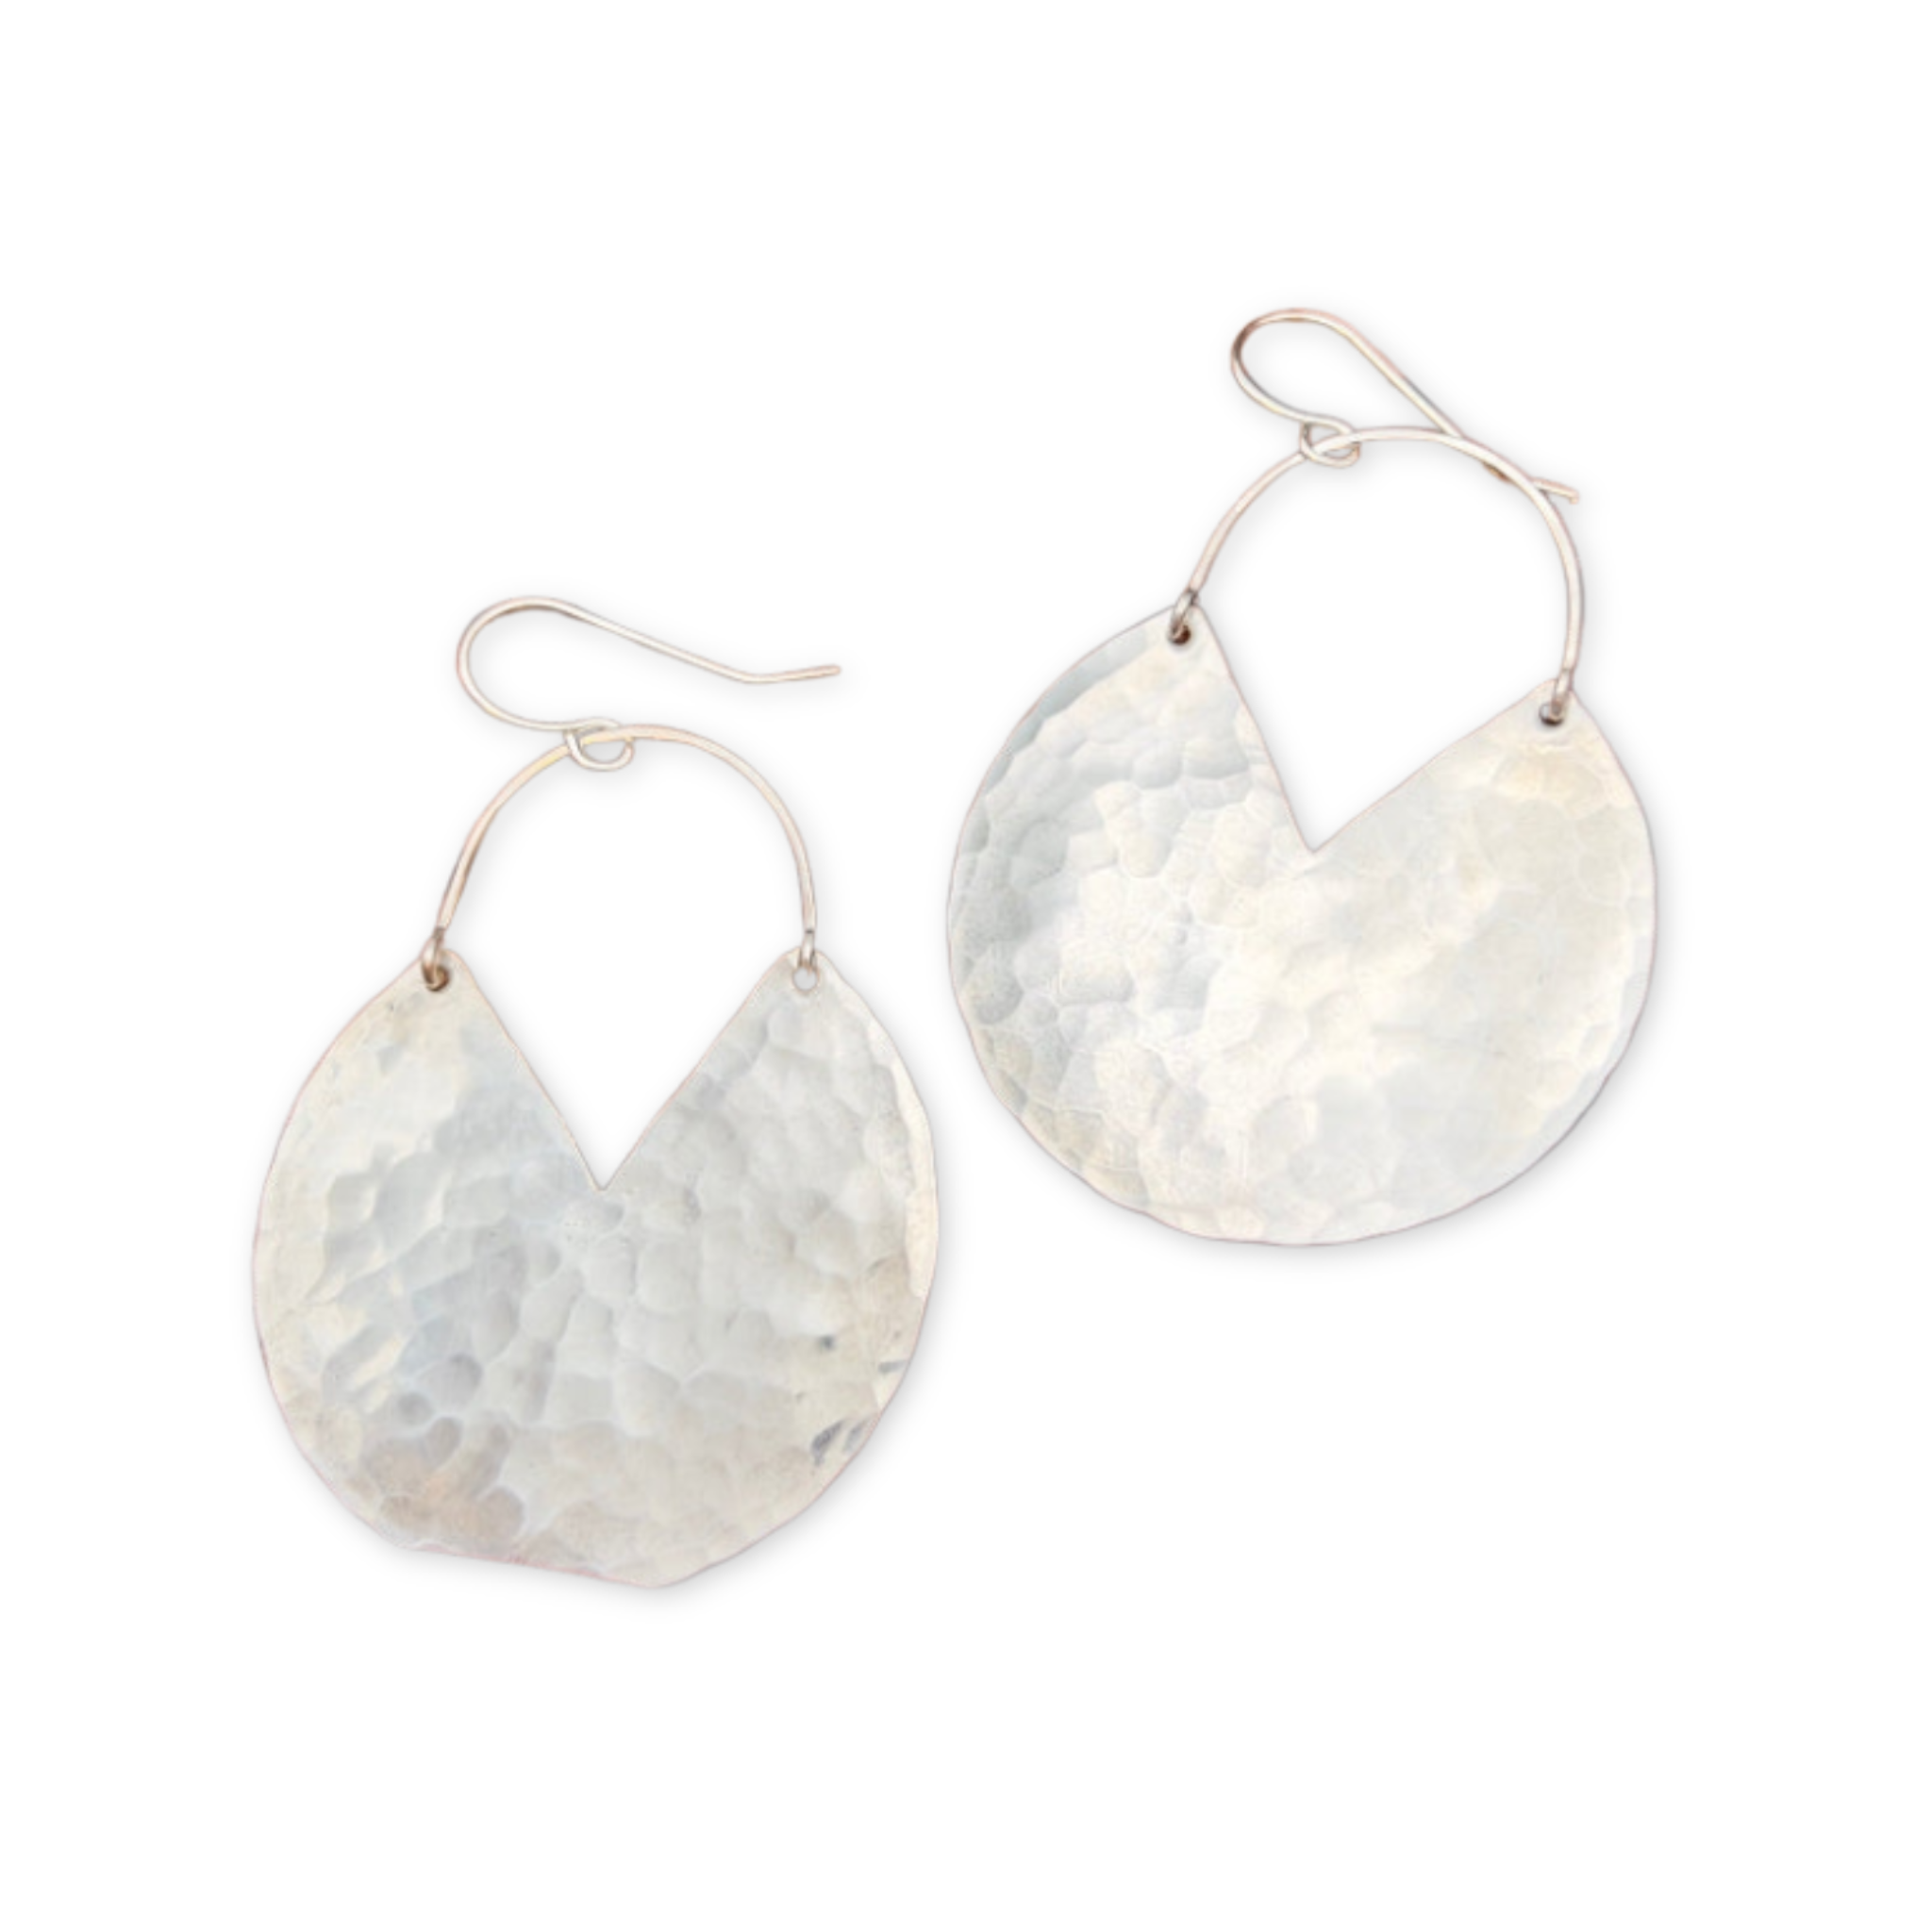 large hammered round disc pendants with angled cutout hanging from thin ear wire